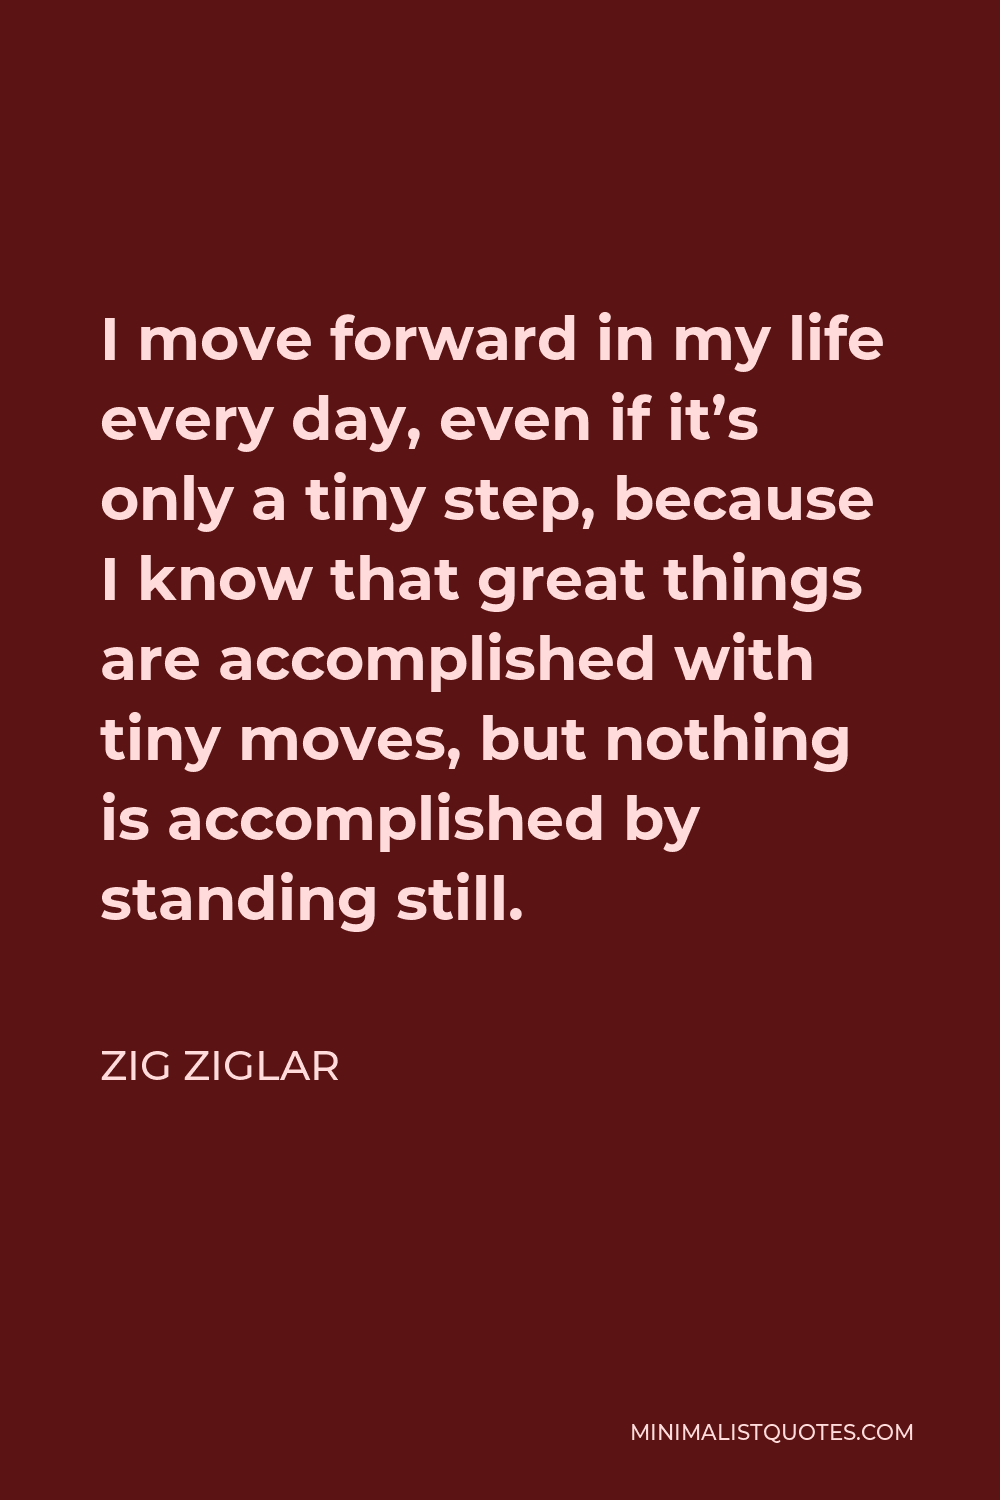 Zig Ziglar Quote - I move forward in my life every day, even if it’s only a tiny step, because I know that great things are accomplished with tiny moves, but nothing is accomplished by standing still.